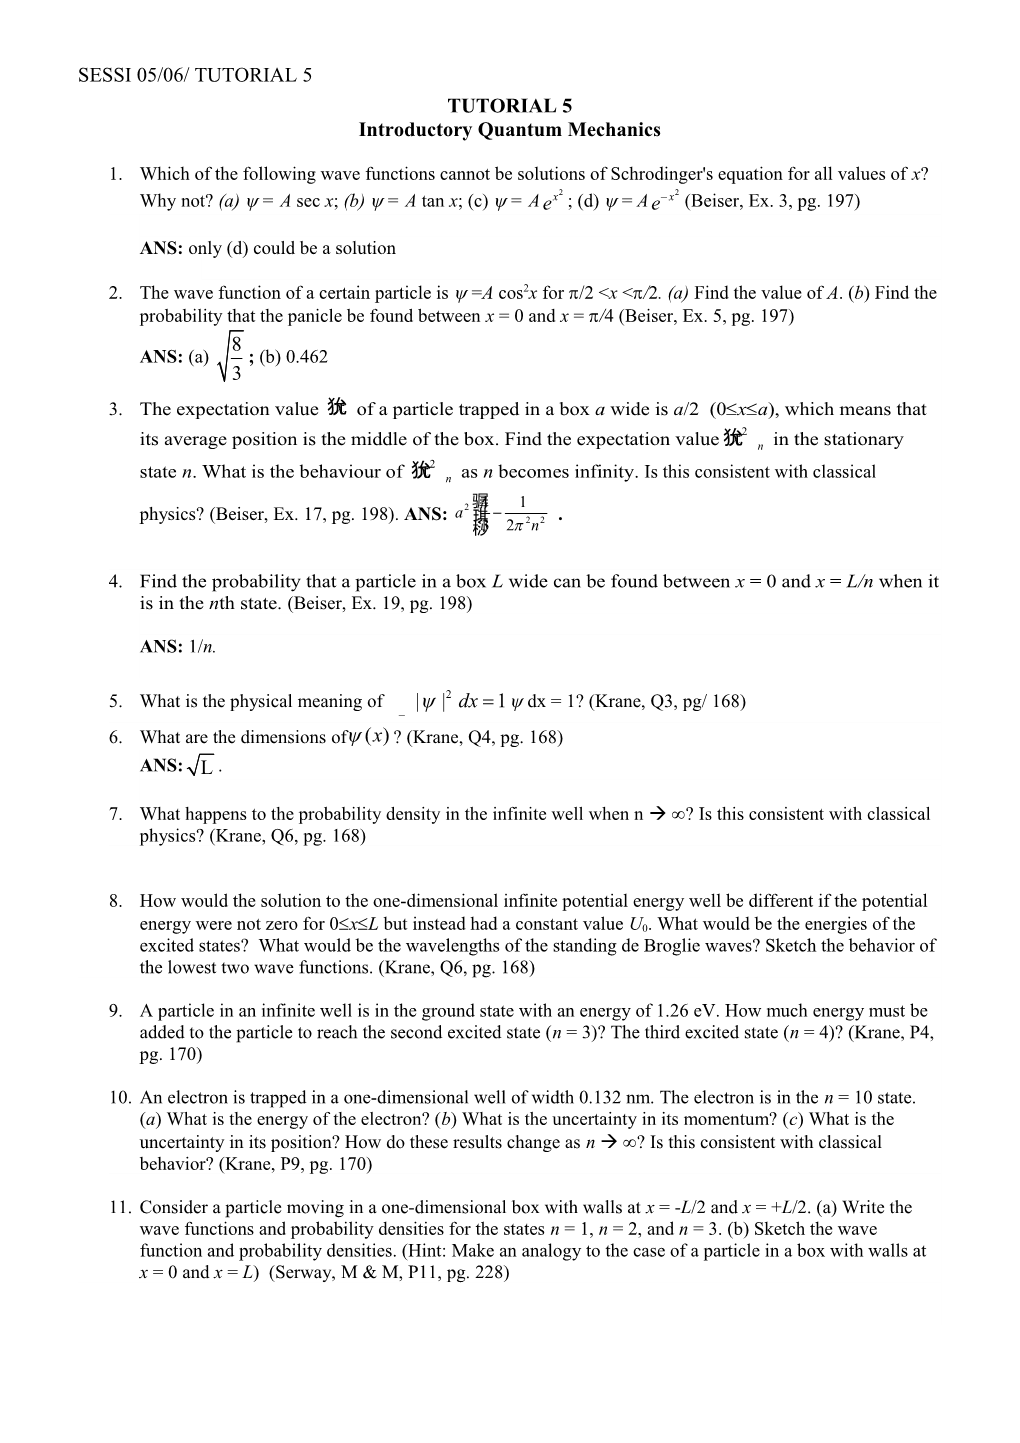 Tutorial Questions on Special Relativity s1